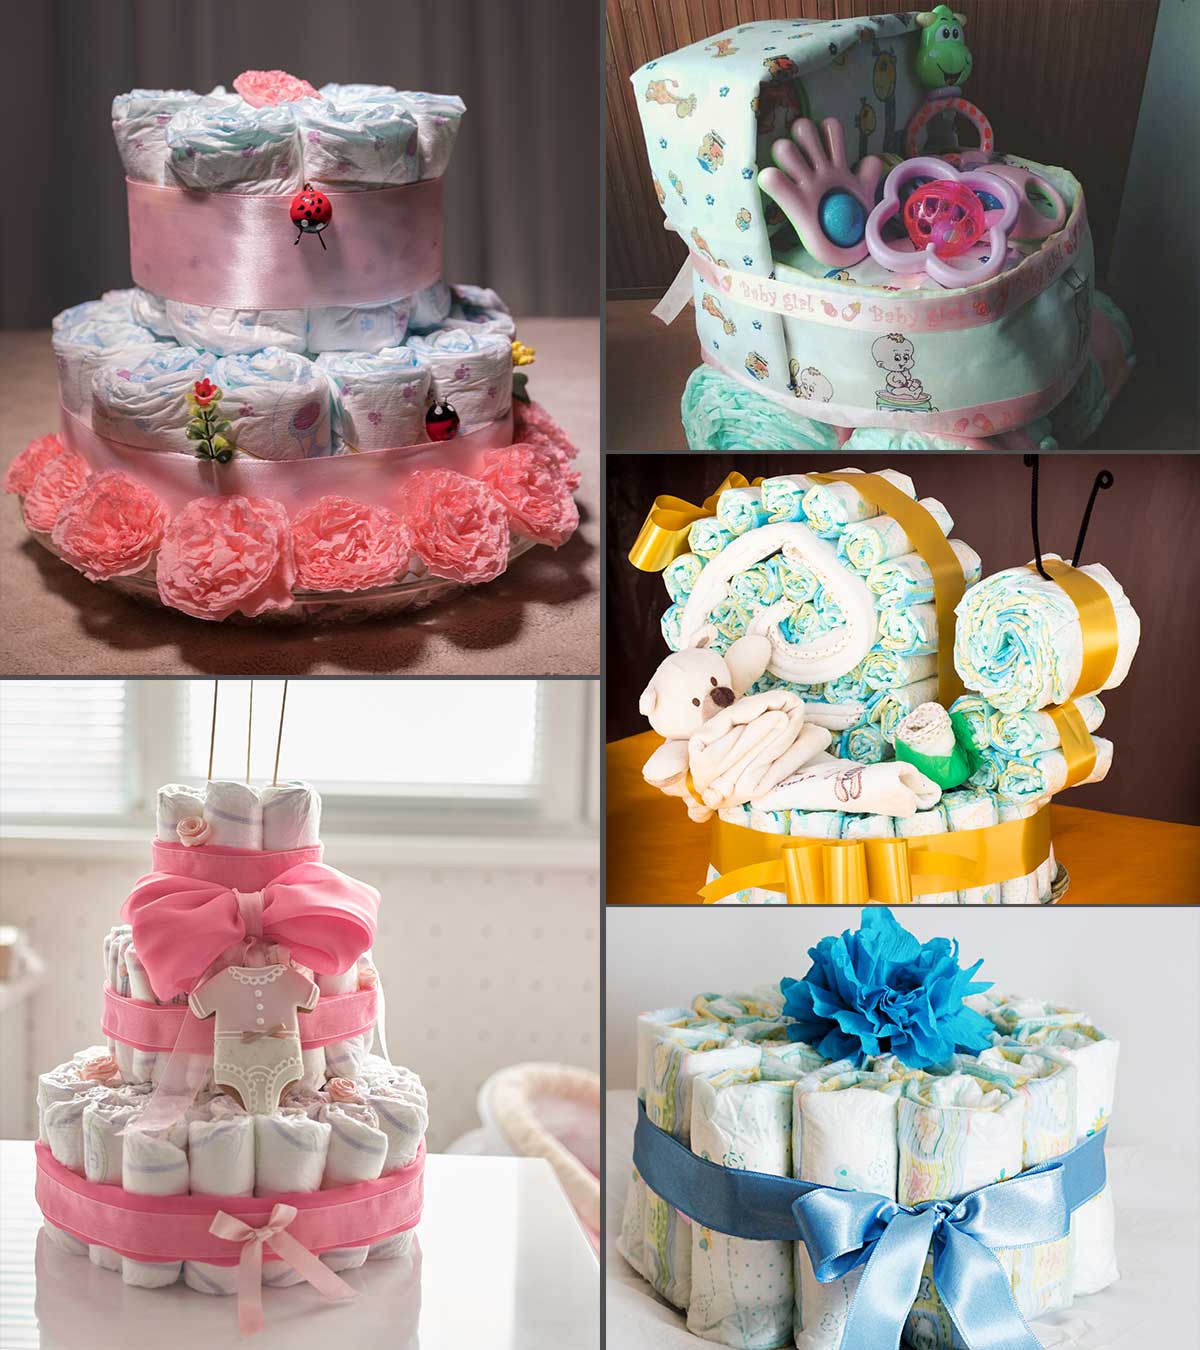 10 Best Diaper Cakes in 2018 - Decorative Two and Four Tier Diaper Cakes